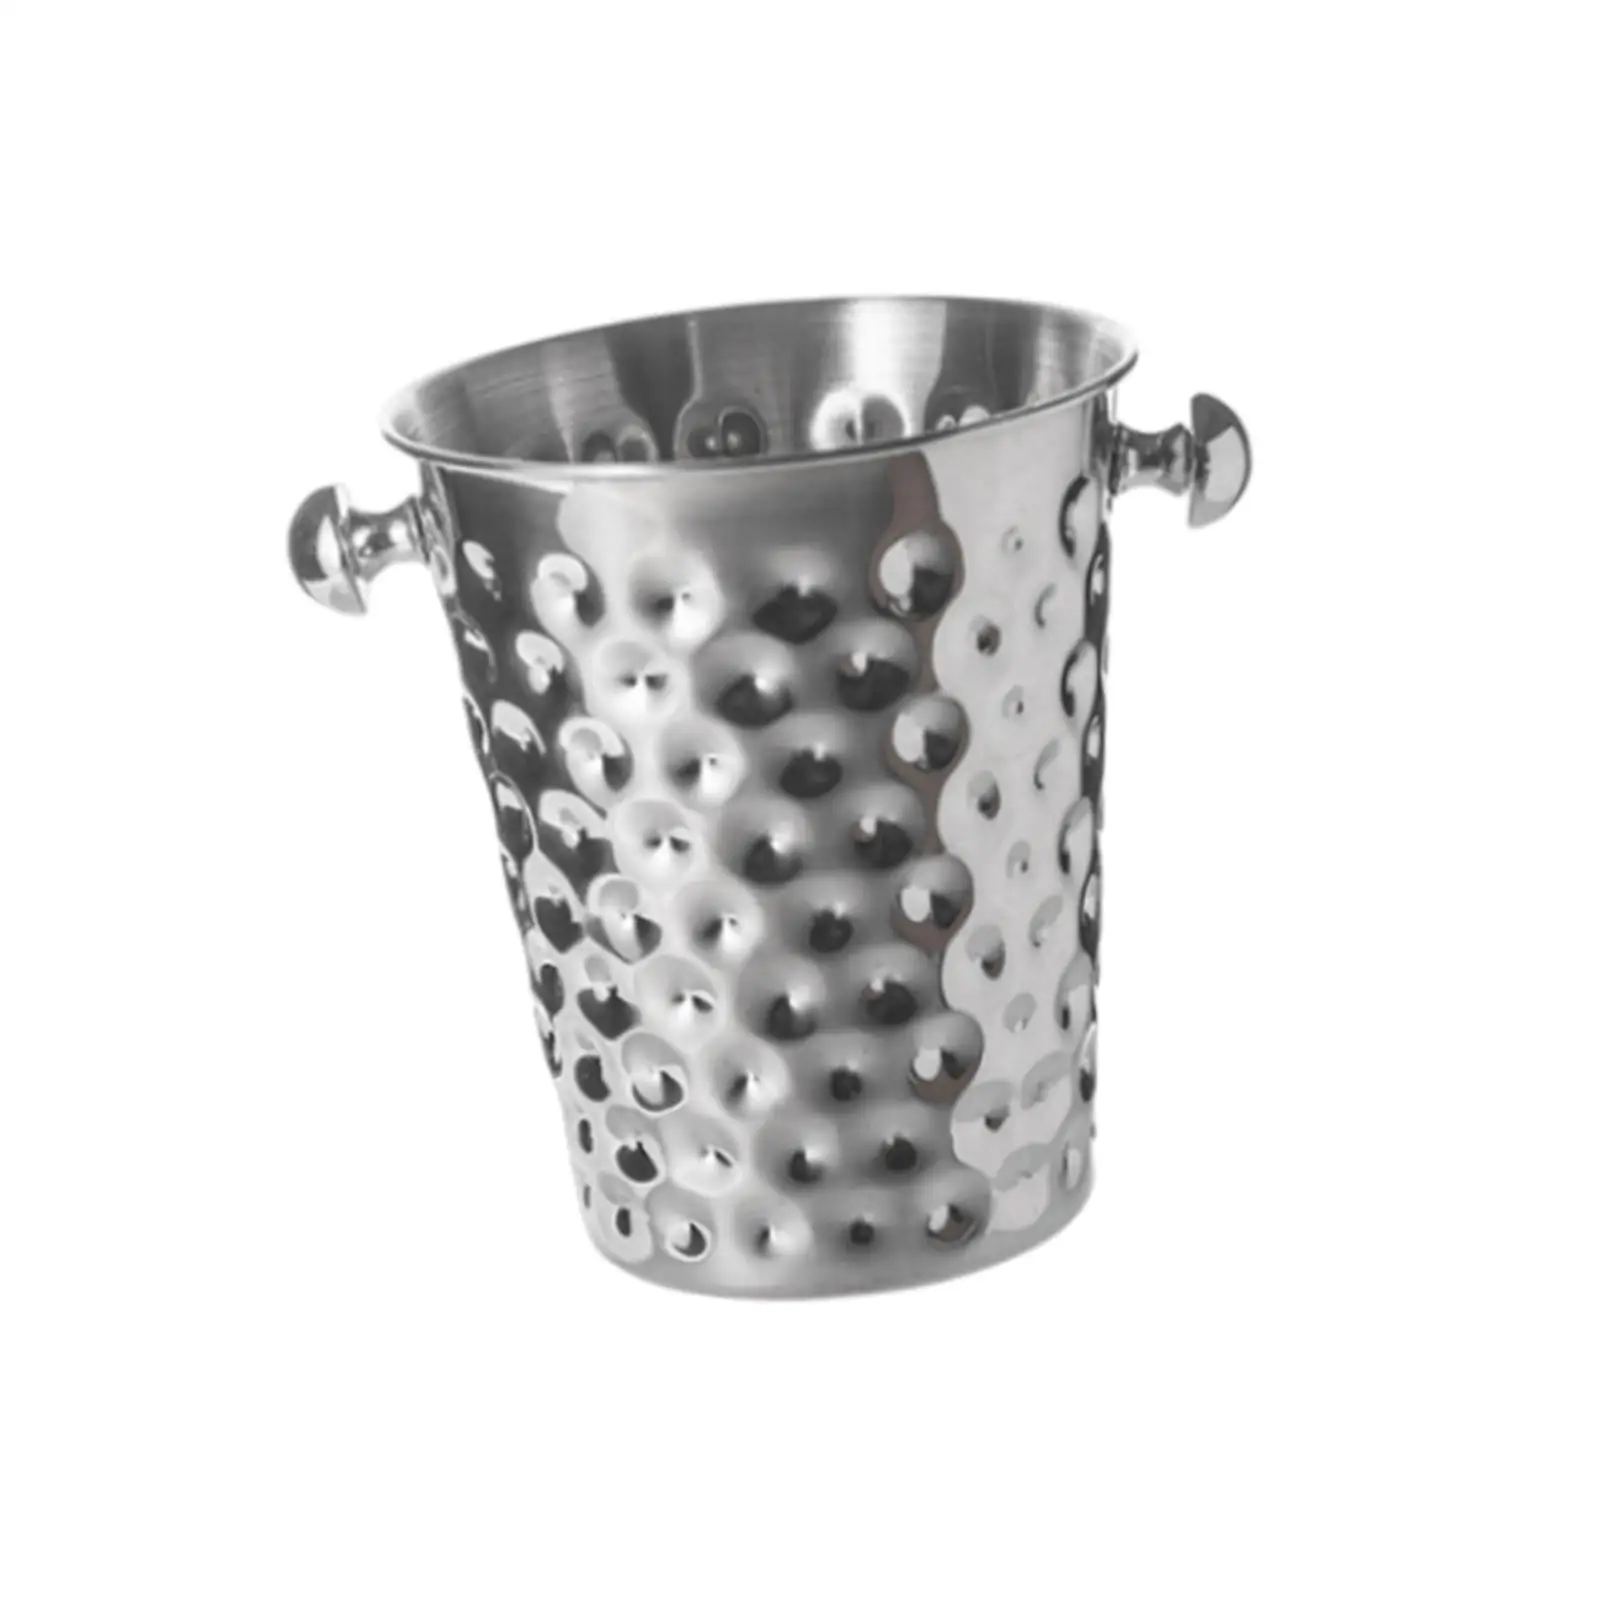 Ice Bucket Fashionable Stainless Steel with Handle Beer Chiller Cooler Bucket for Household Party Indoor Outdoor BBQ Drinks